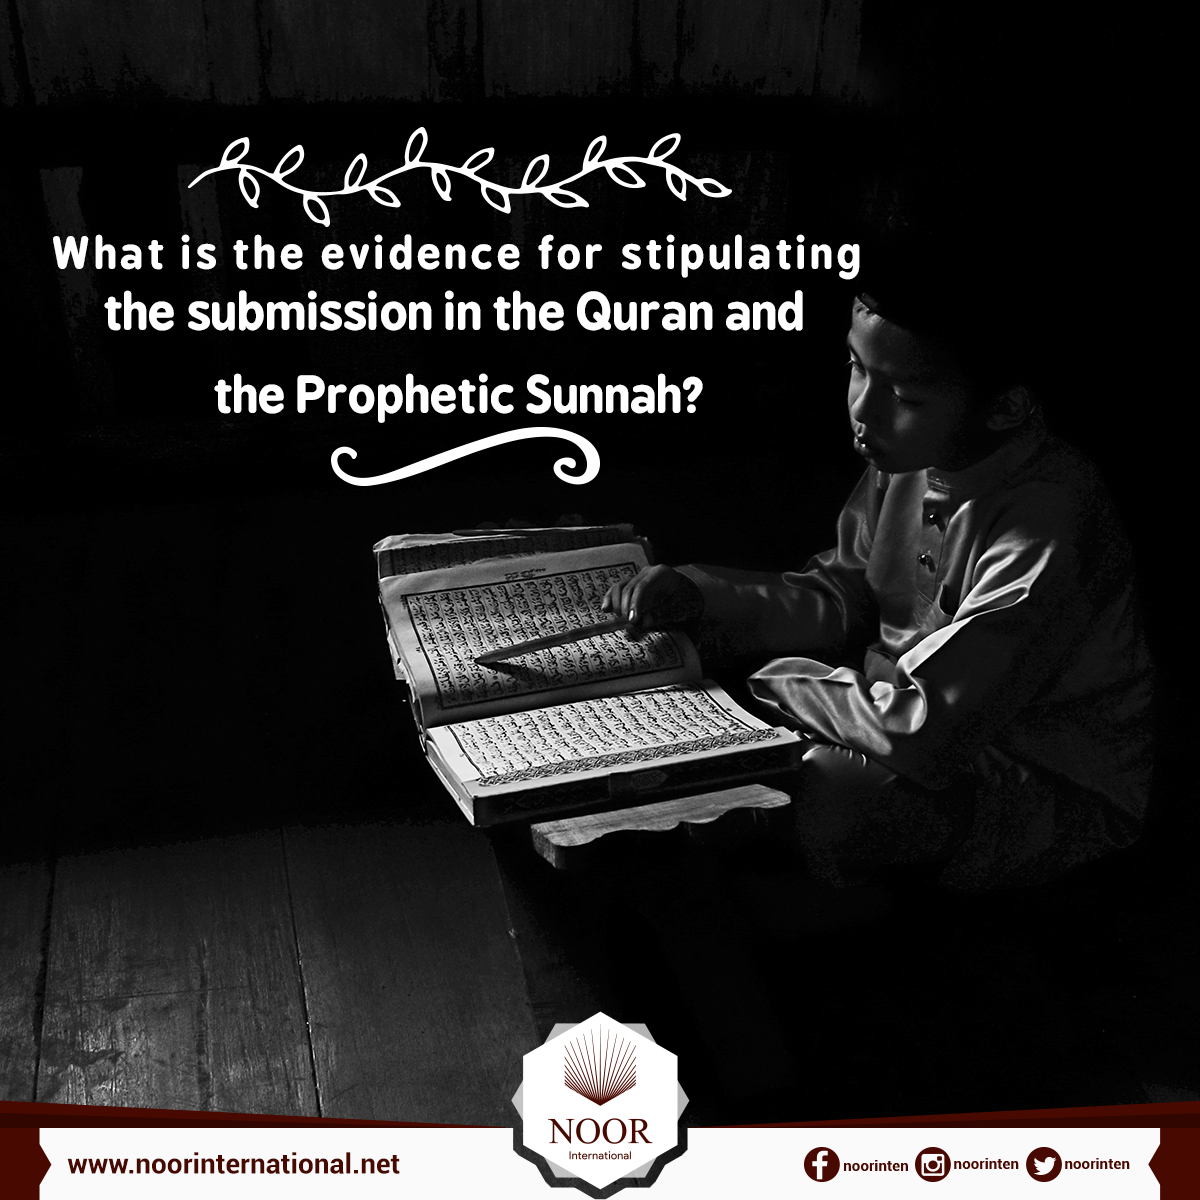 What is the evidence for stipulating the submission in the Quran and the Prophetic Sunnah?